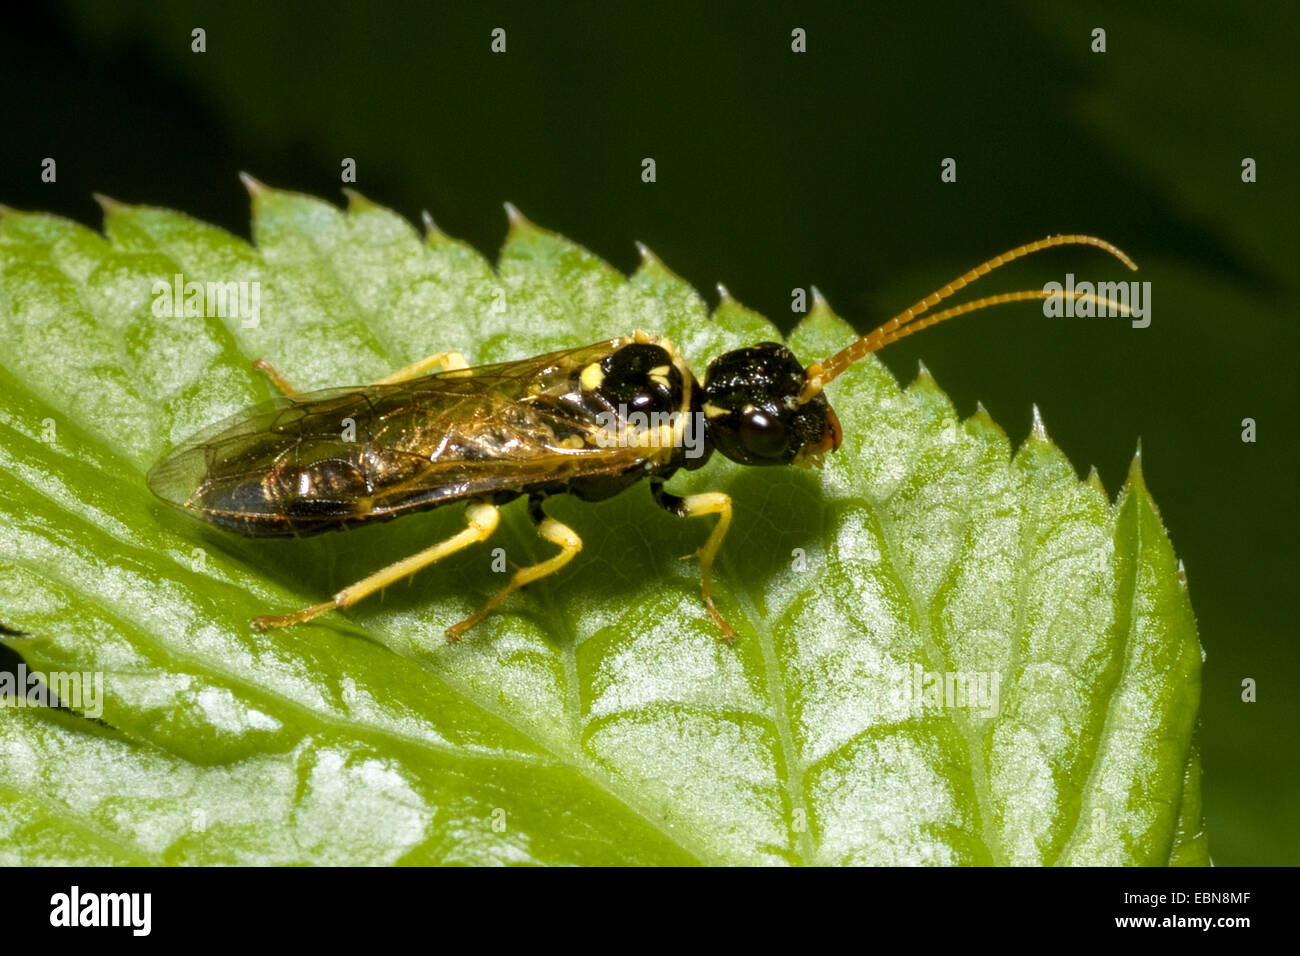 Sawfly (Pamphilius sylvaticus), on a leaf, Germany Stock Photo